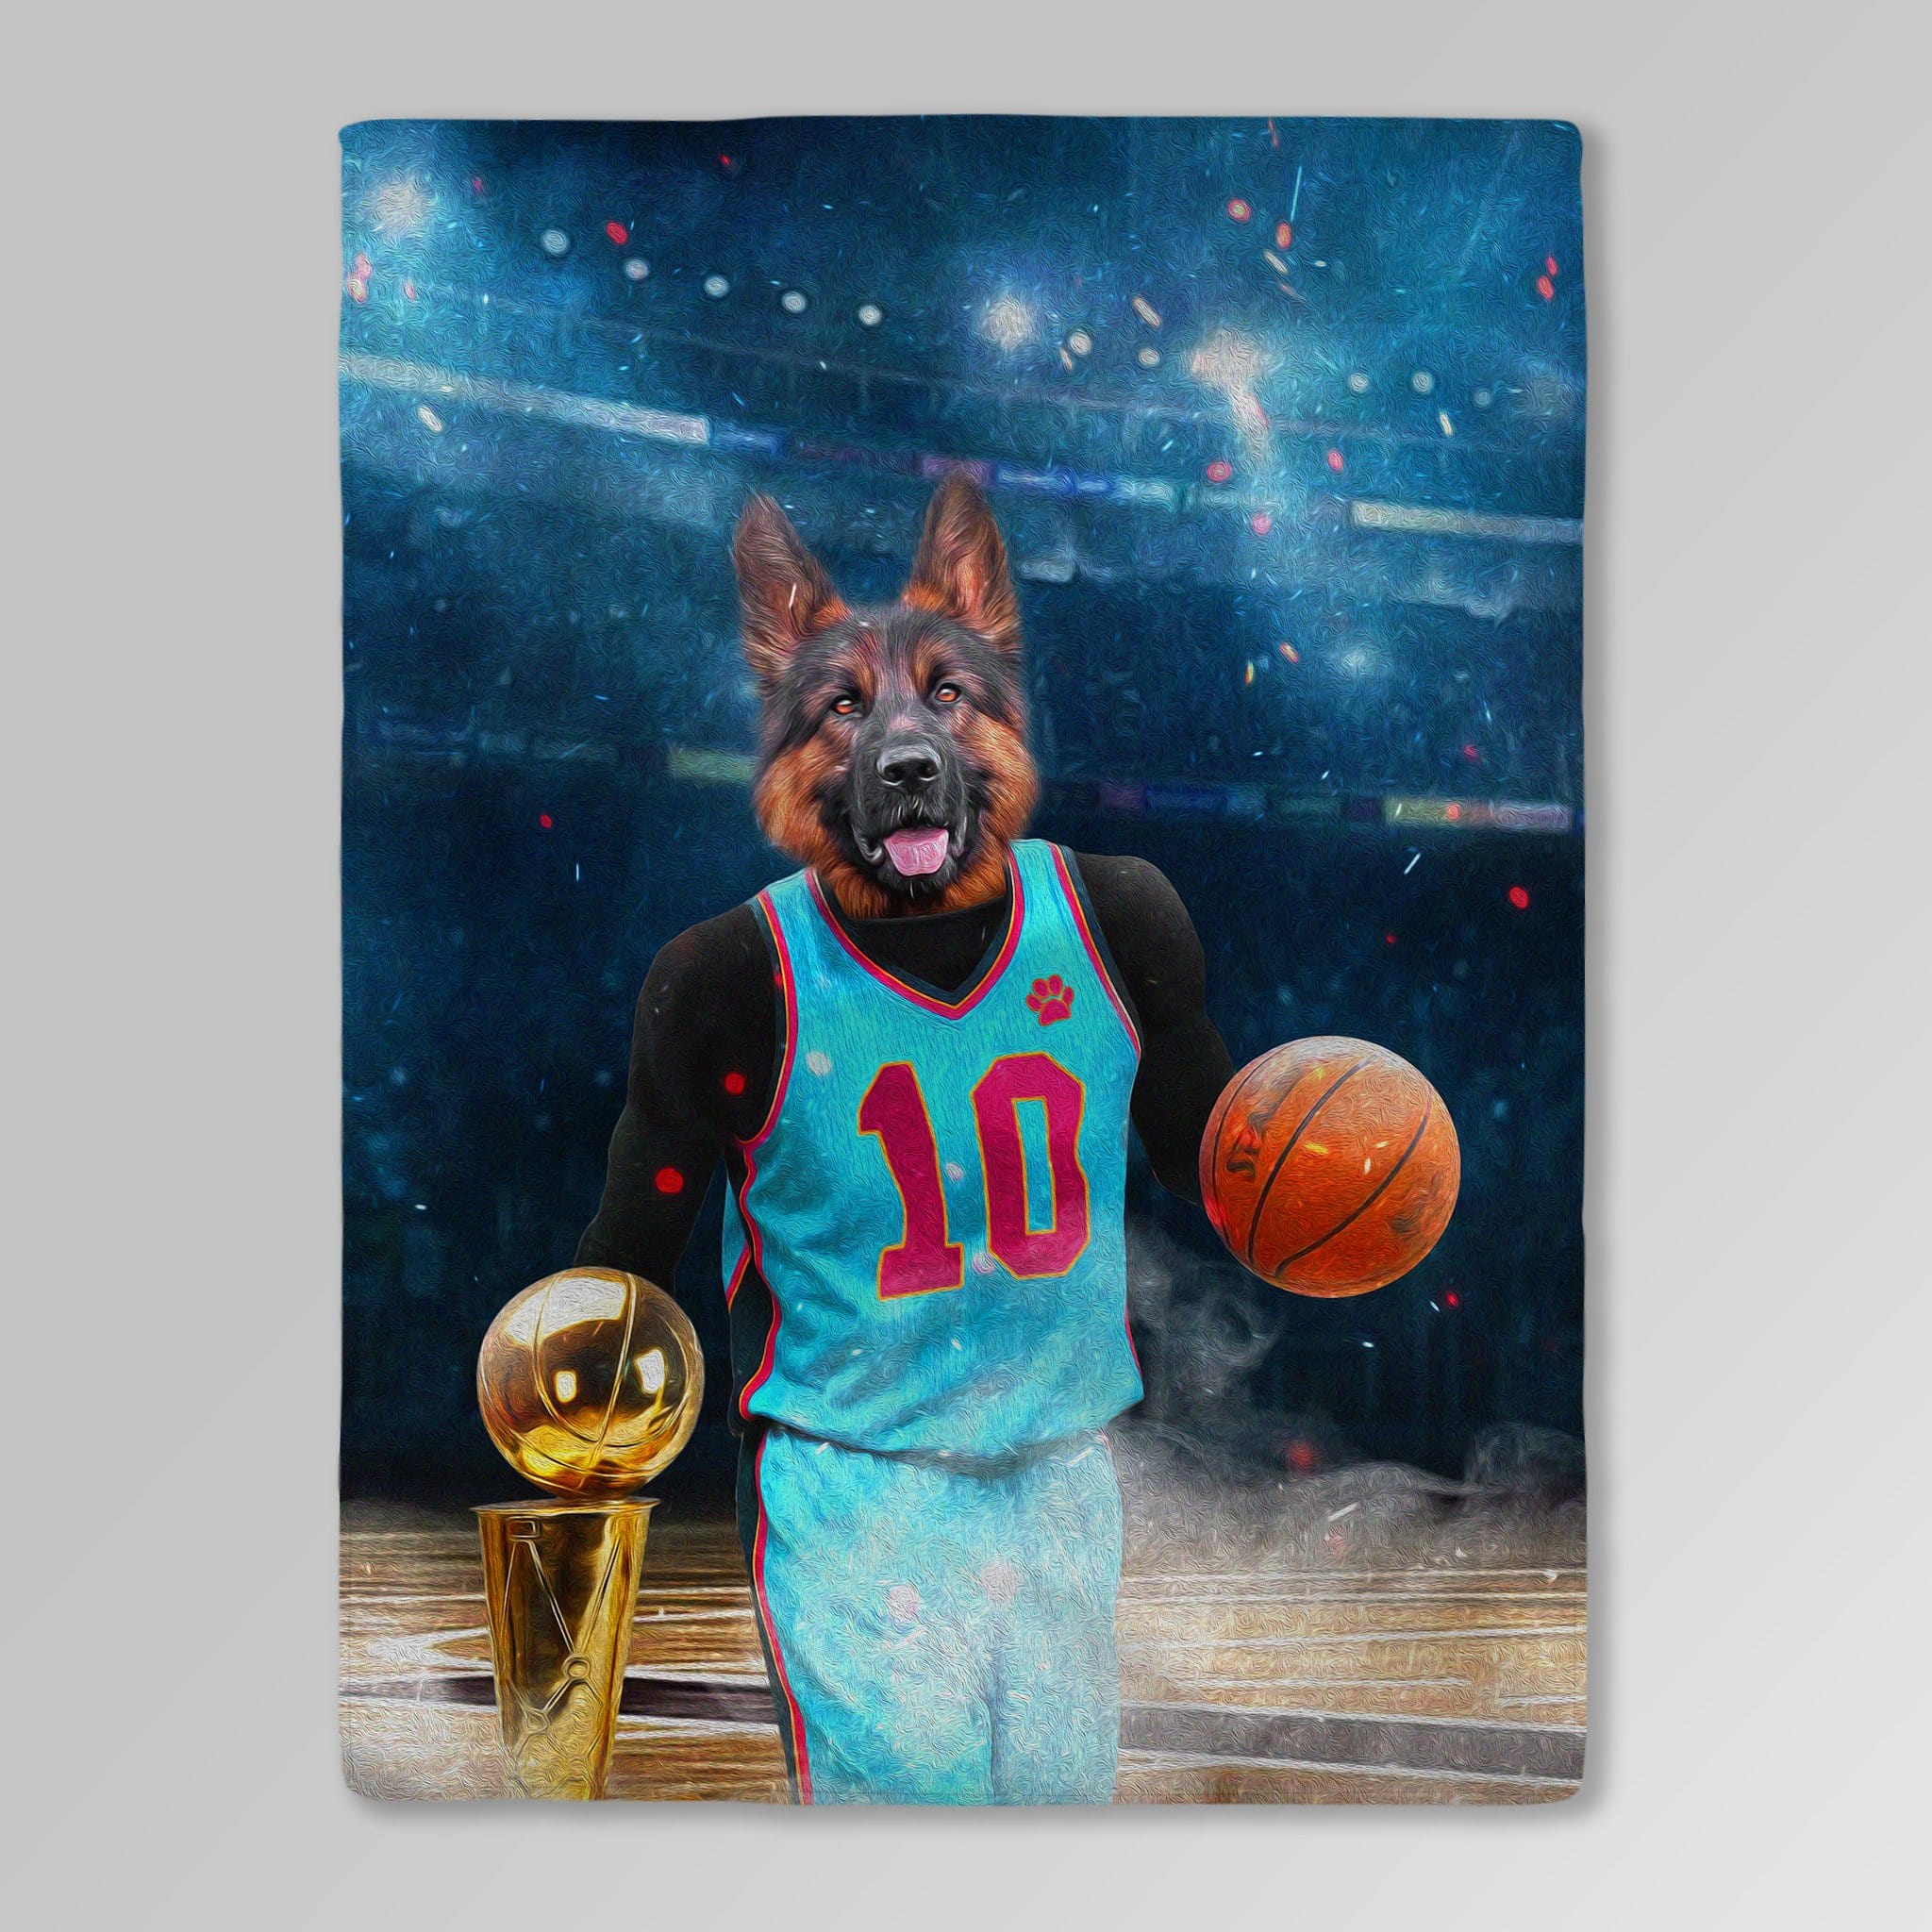 &#39;The Basketball Player&#39; Personalized Pet Blanket